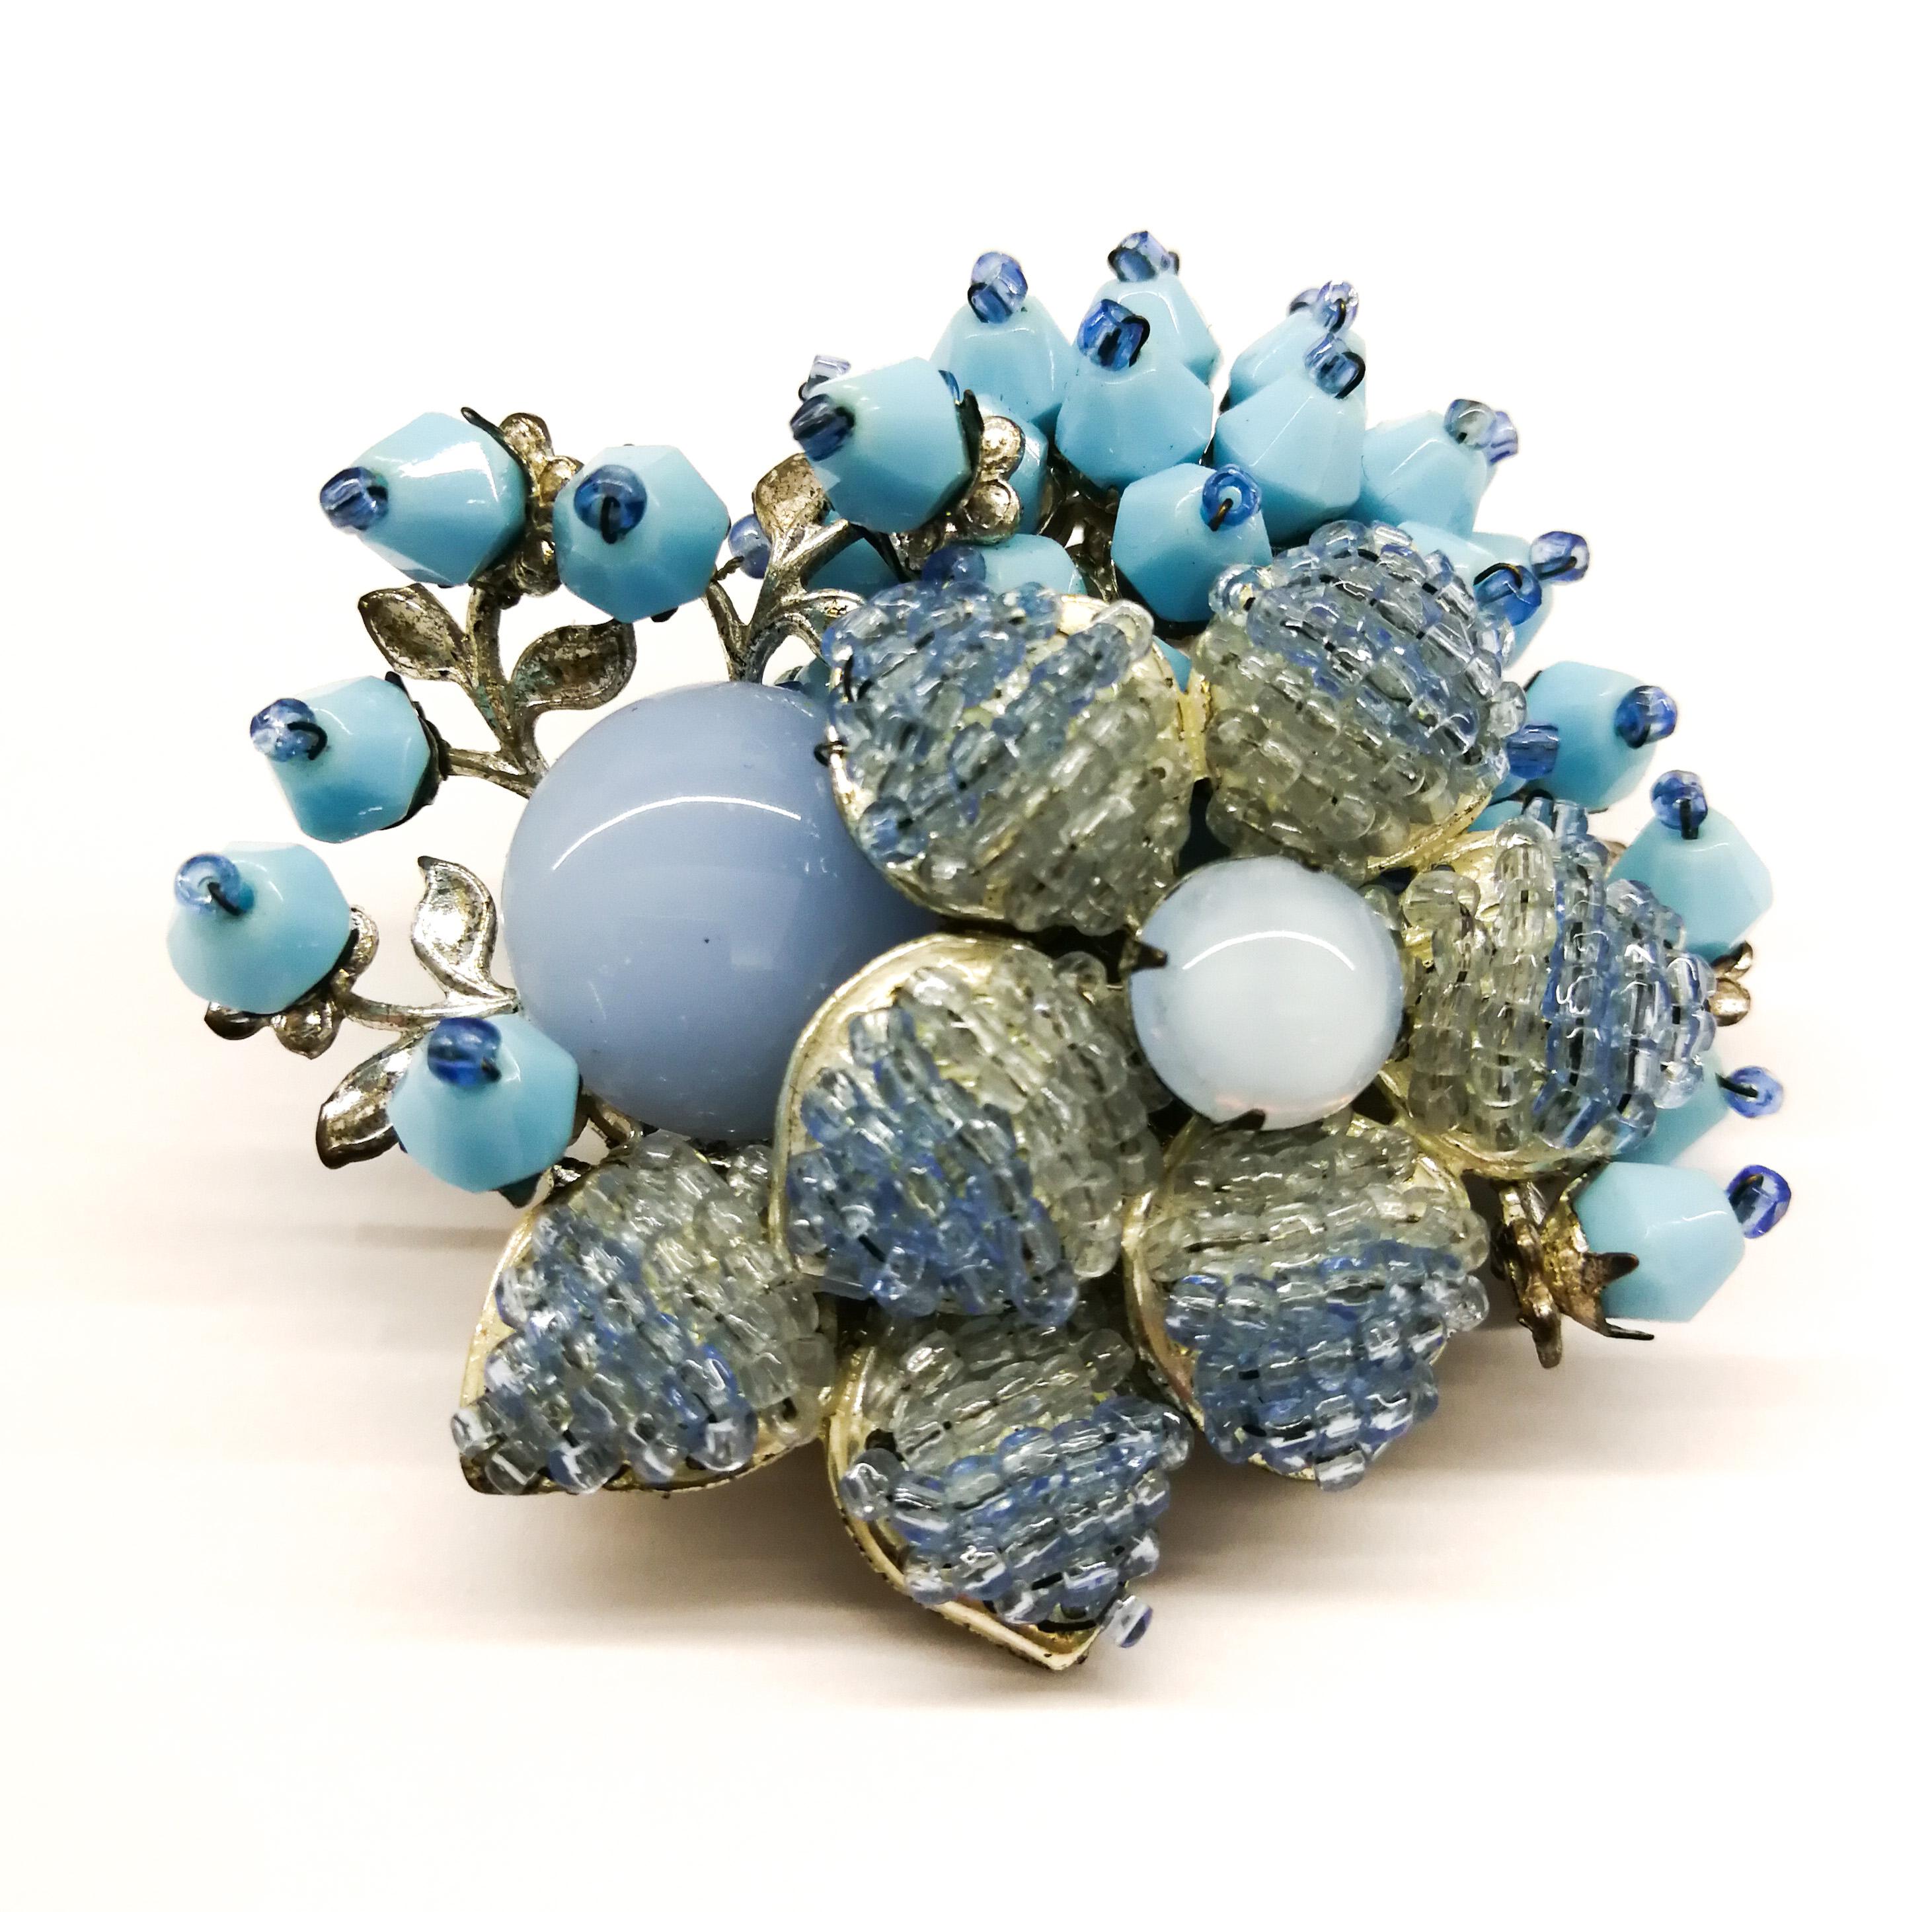 An unusual stylised floral brooch, made from cabuchons , tightly 'knitted' glass beads and unusually shaped opaque beads, from Miriam Haskell, creating a very distinctive look. Perfect for Summer and those carefree occasions, Haskell's quality and